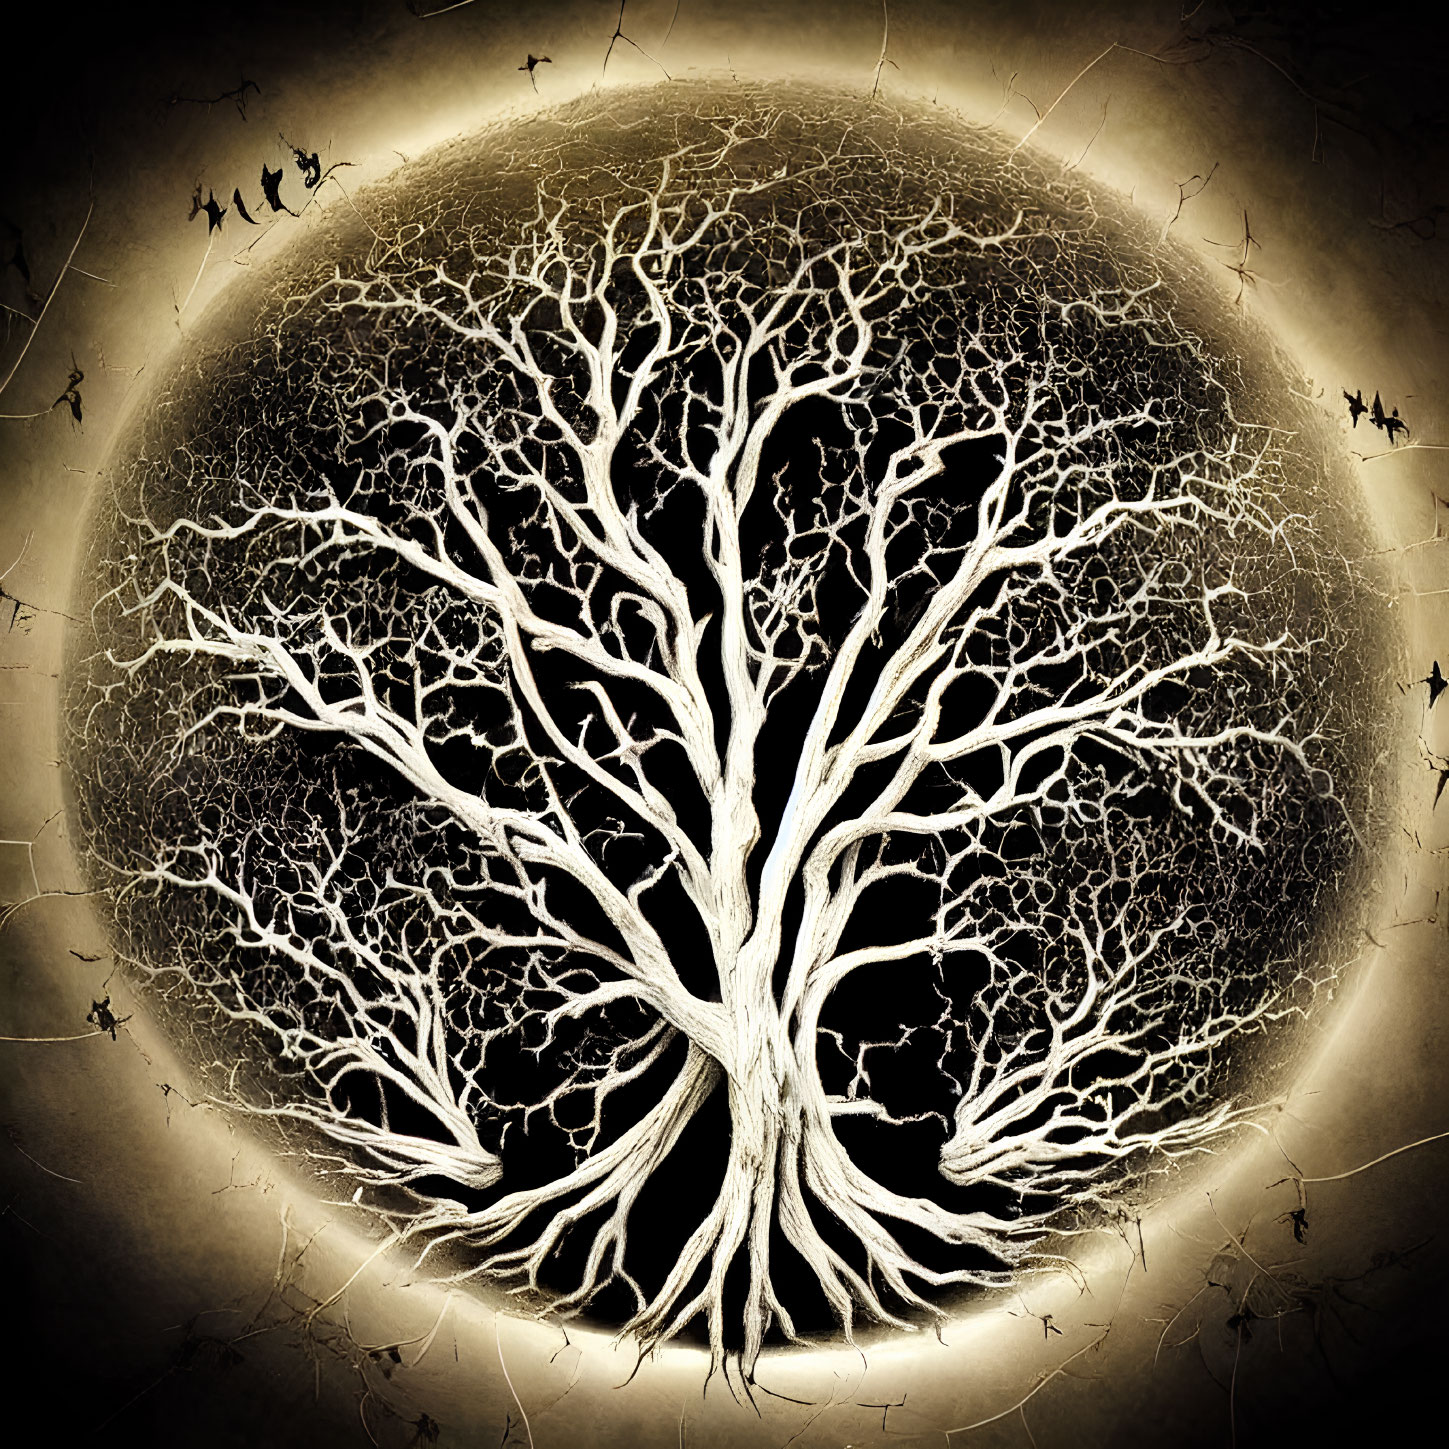 Intricate tree branches on dark circular backdrop resemble eye or celestial body